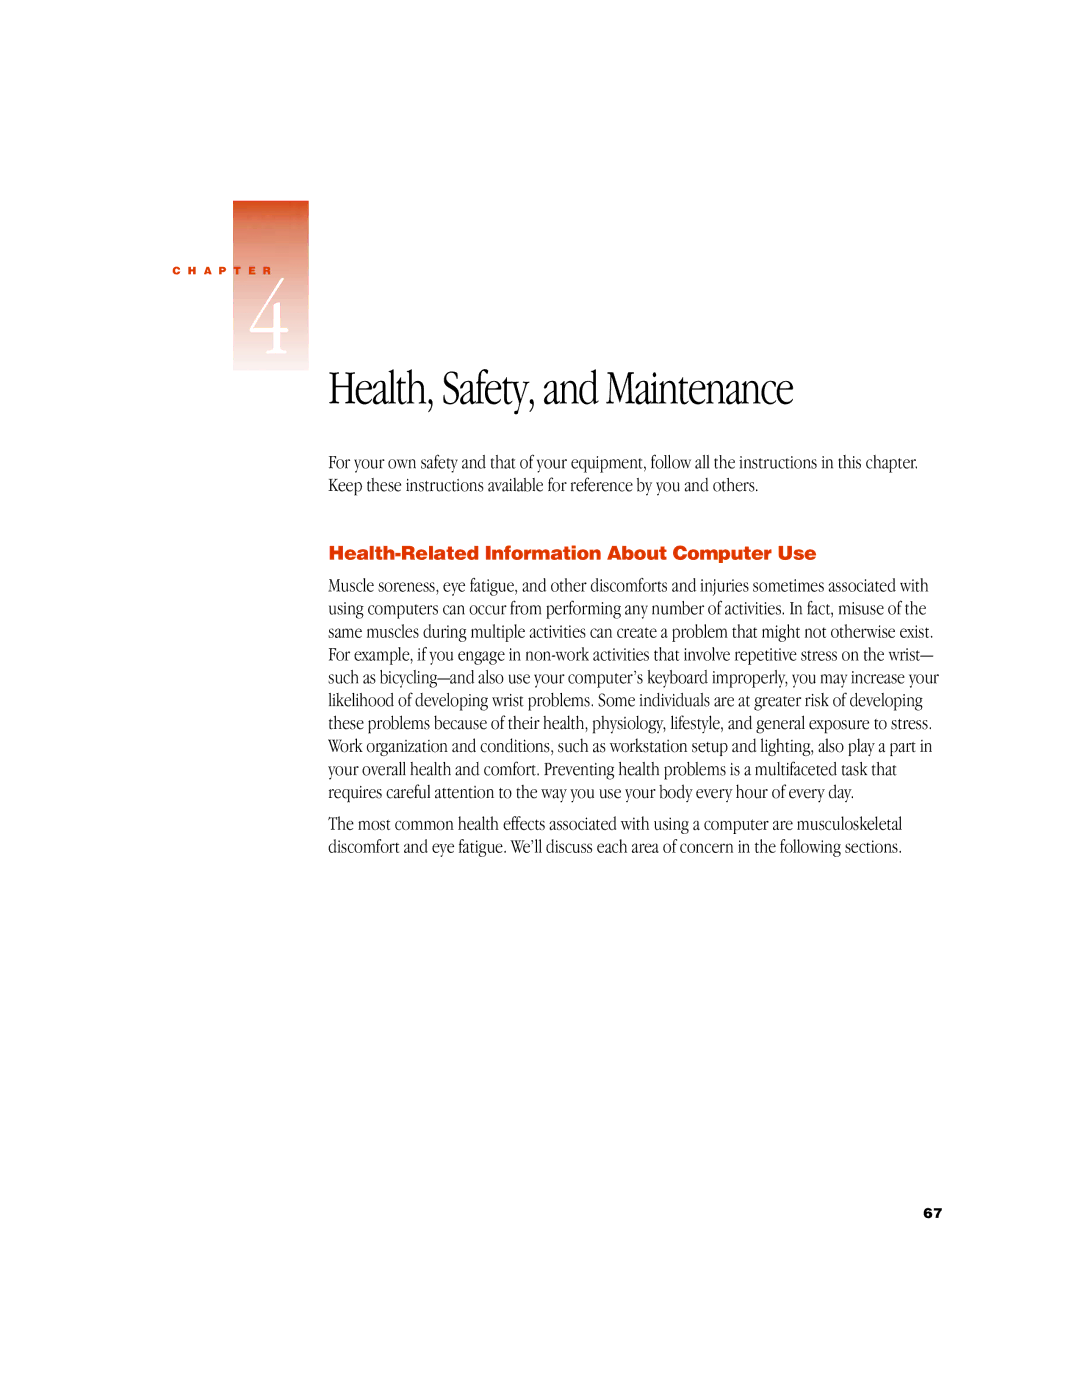 Apple G3 manual Health, Safety, and Maintenance, Health-Related Information About Computer Use 